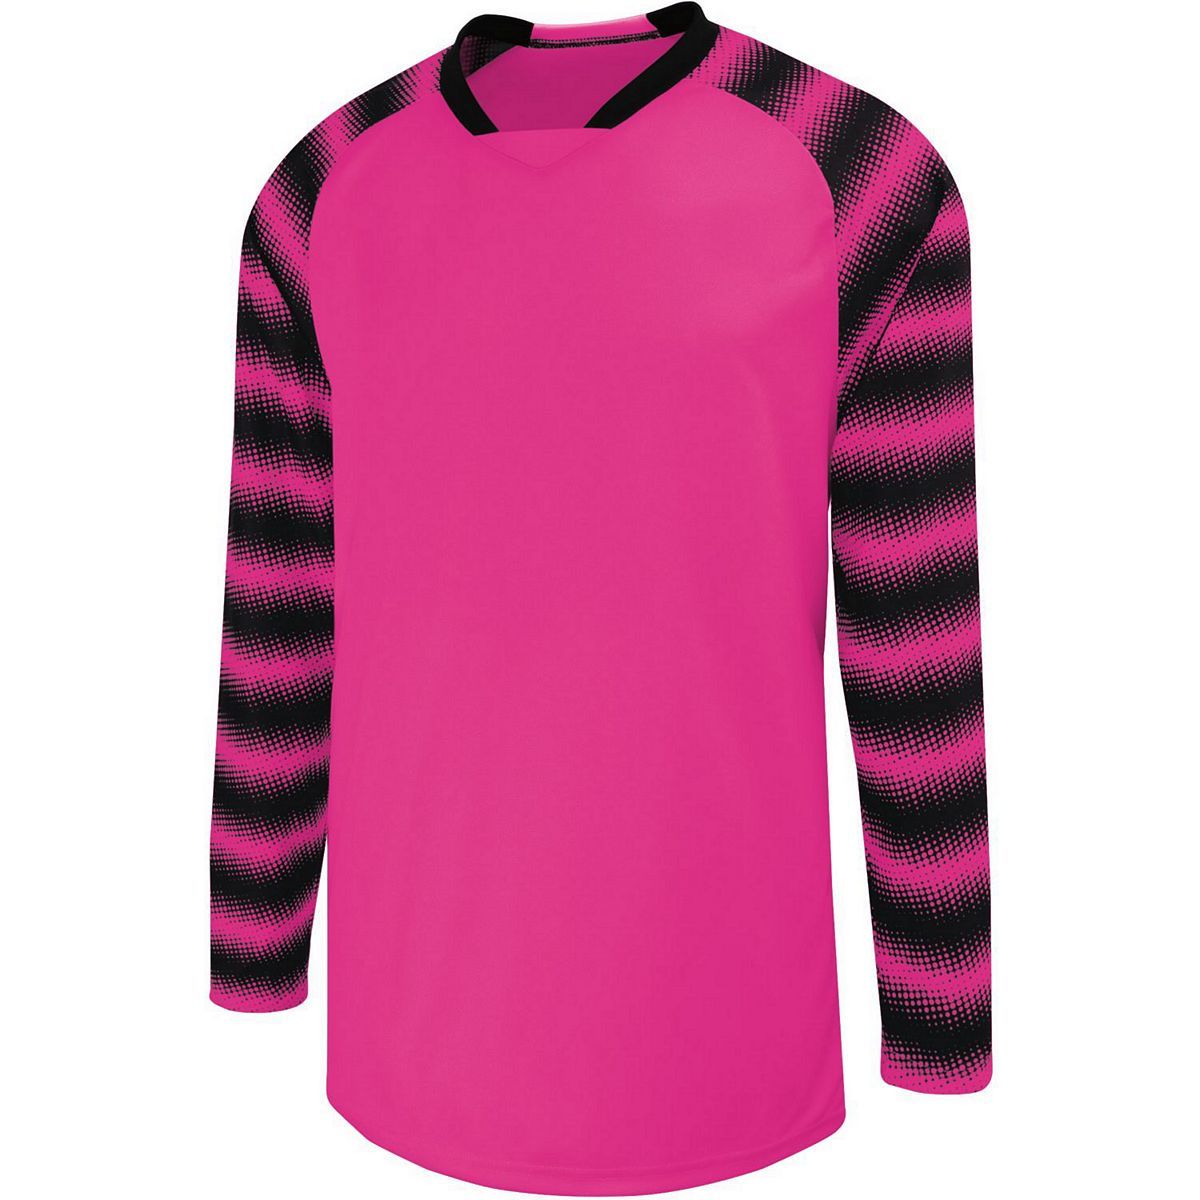 High 5 Youth Prism Goalkeeper Jersey in Raspberry/Black  -Part of the Youth, Youth-Jersey, High5-Products, Soccer, Shirts, All-Sports-1 product lines at KanaleyCreations.com